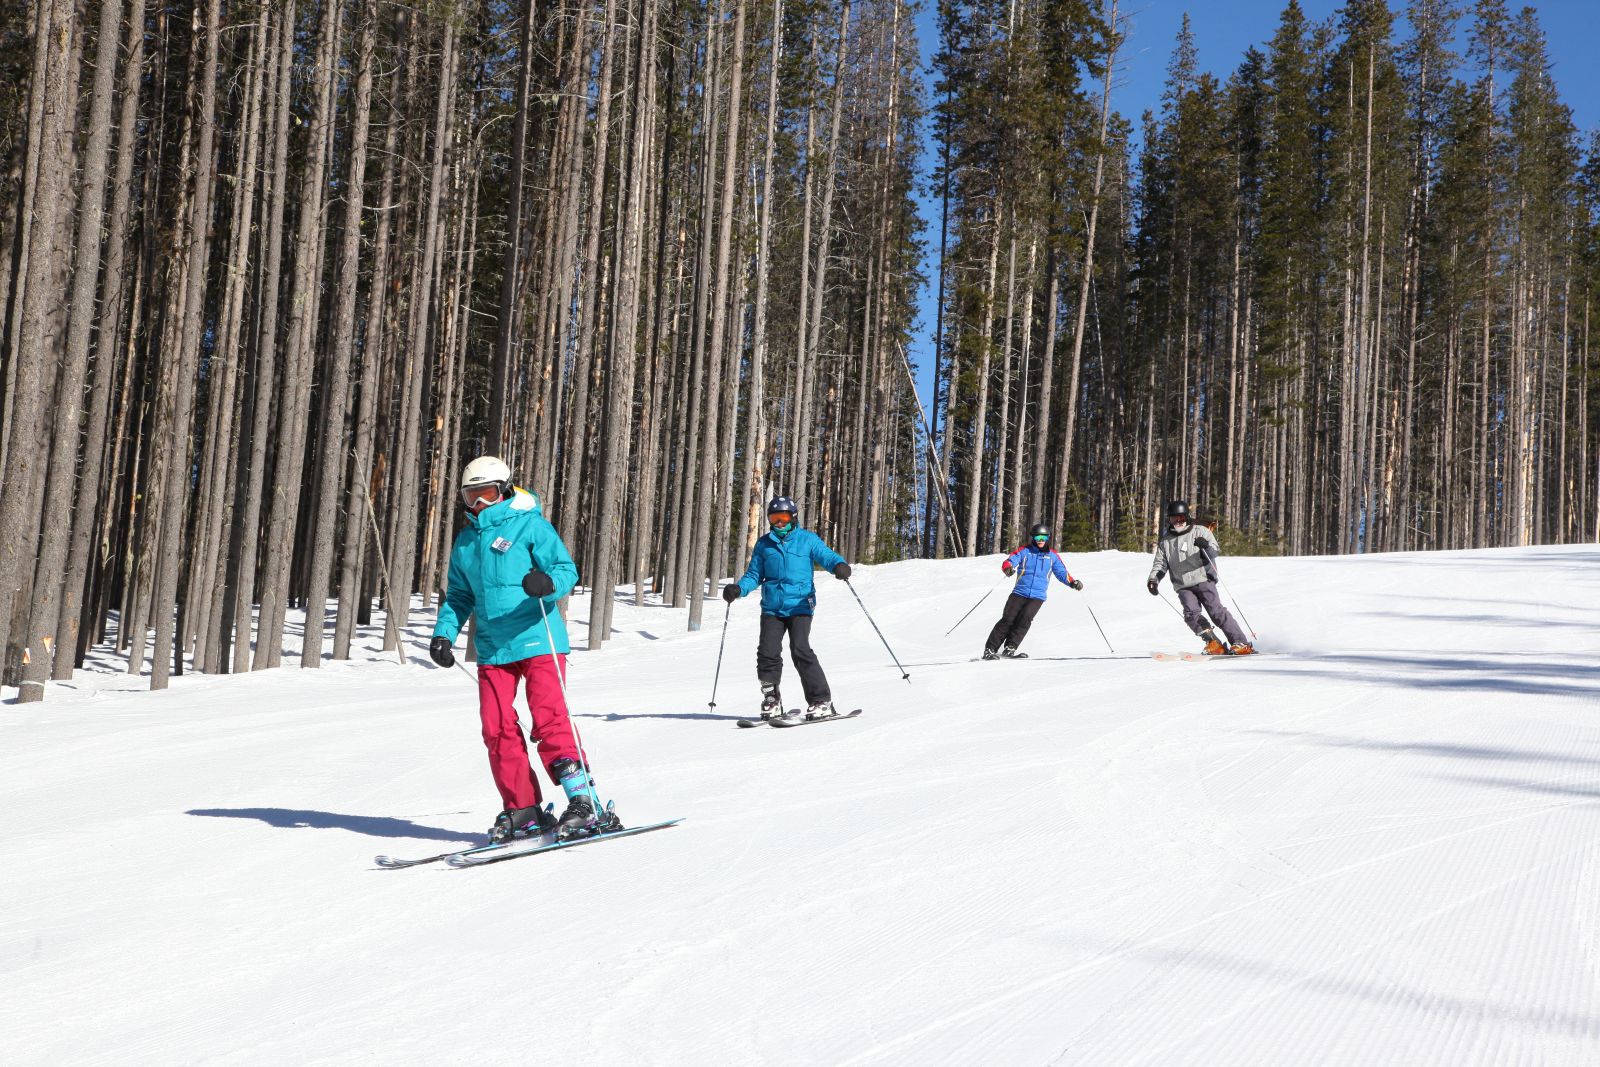 Senior group skiing down the hill at Lookout